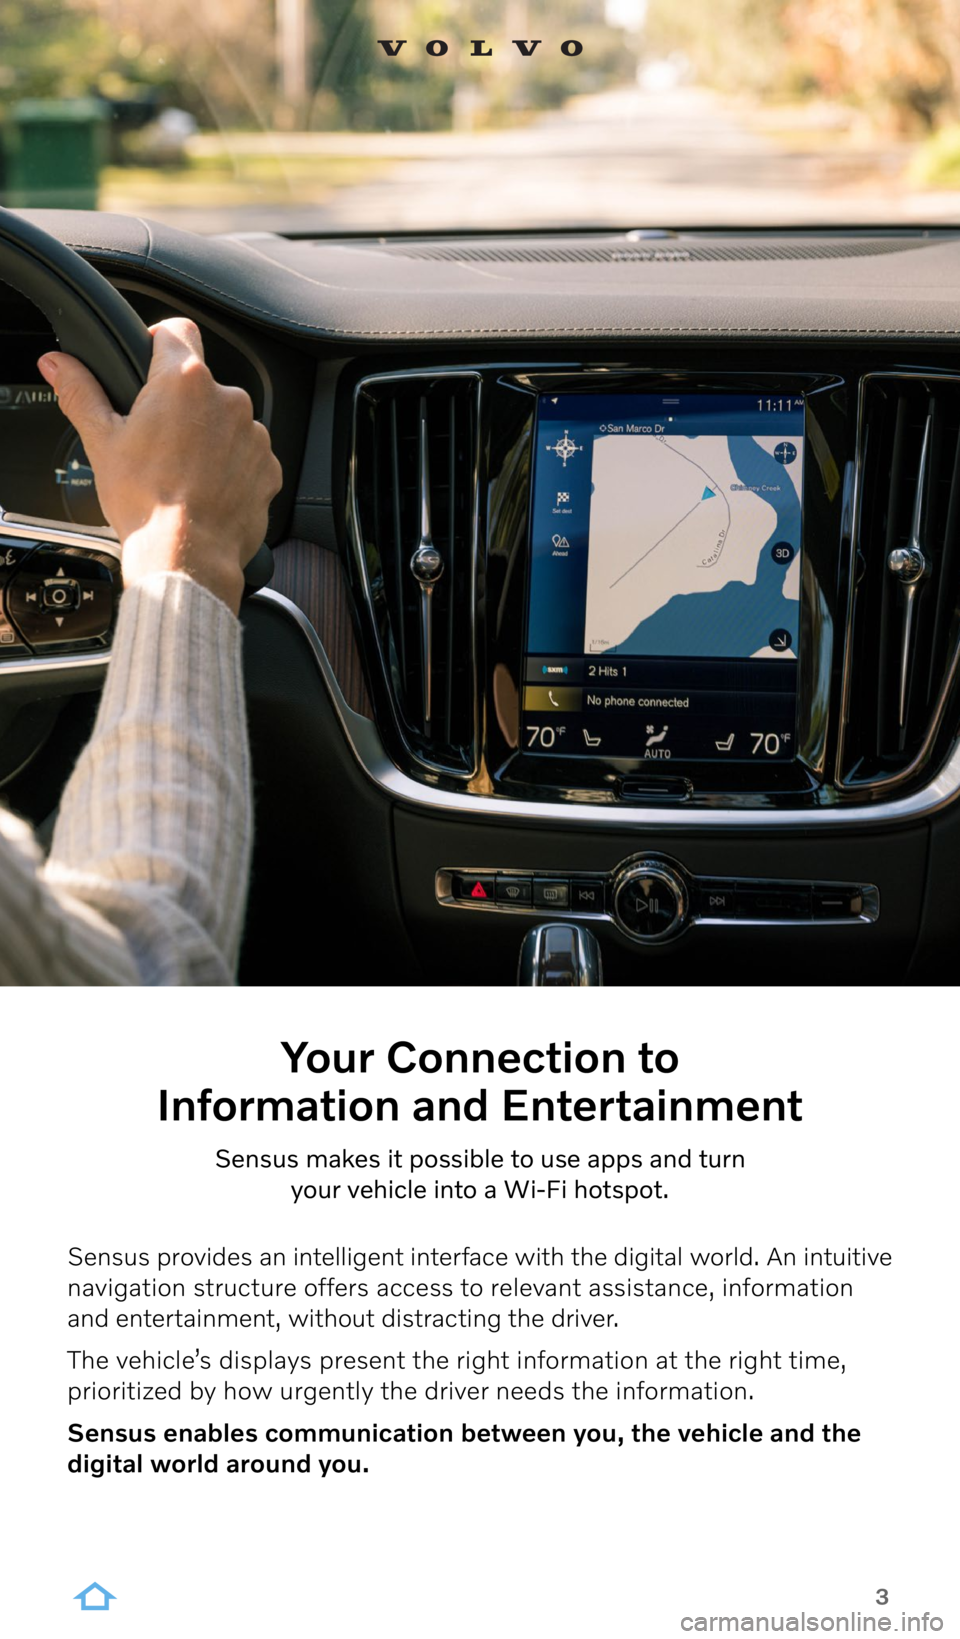 VOLVO S60 2022  Sensus Digital Guide 3
Your Connection to  
Information and Entertainment
Sensus makes it possible to use apps and turn  
your vehicle into a Wi-Fi hotspot.
Sensus provides an intelligent interface with the digital world.